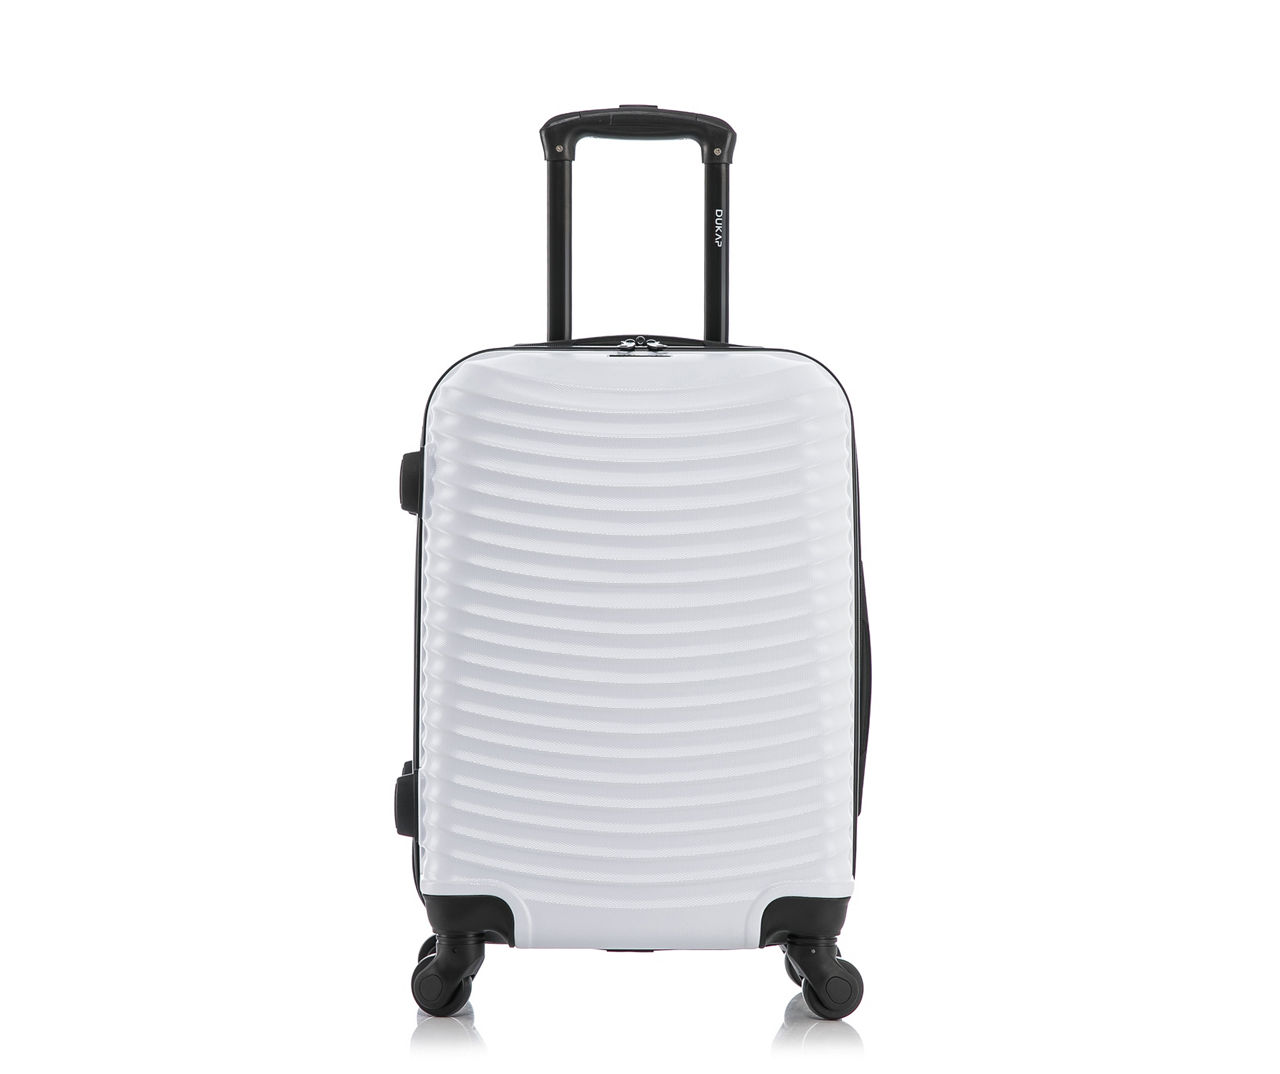 DUKAP Adly White 20" Curved-Ridge Hardside Spinner Carry-On Suitcase